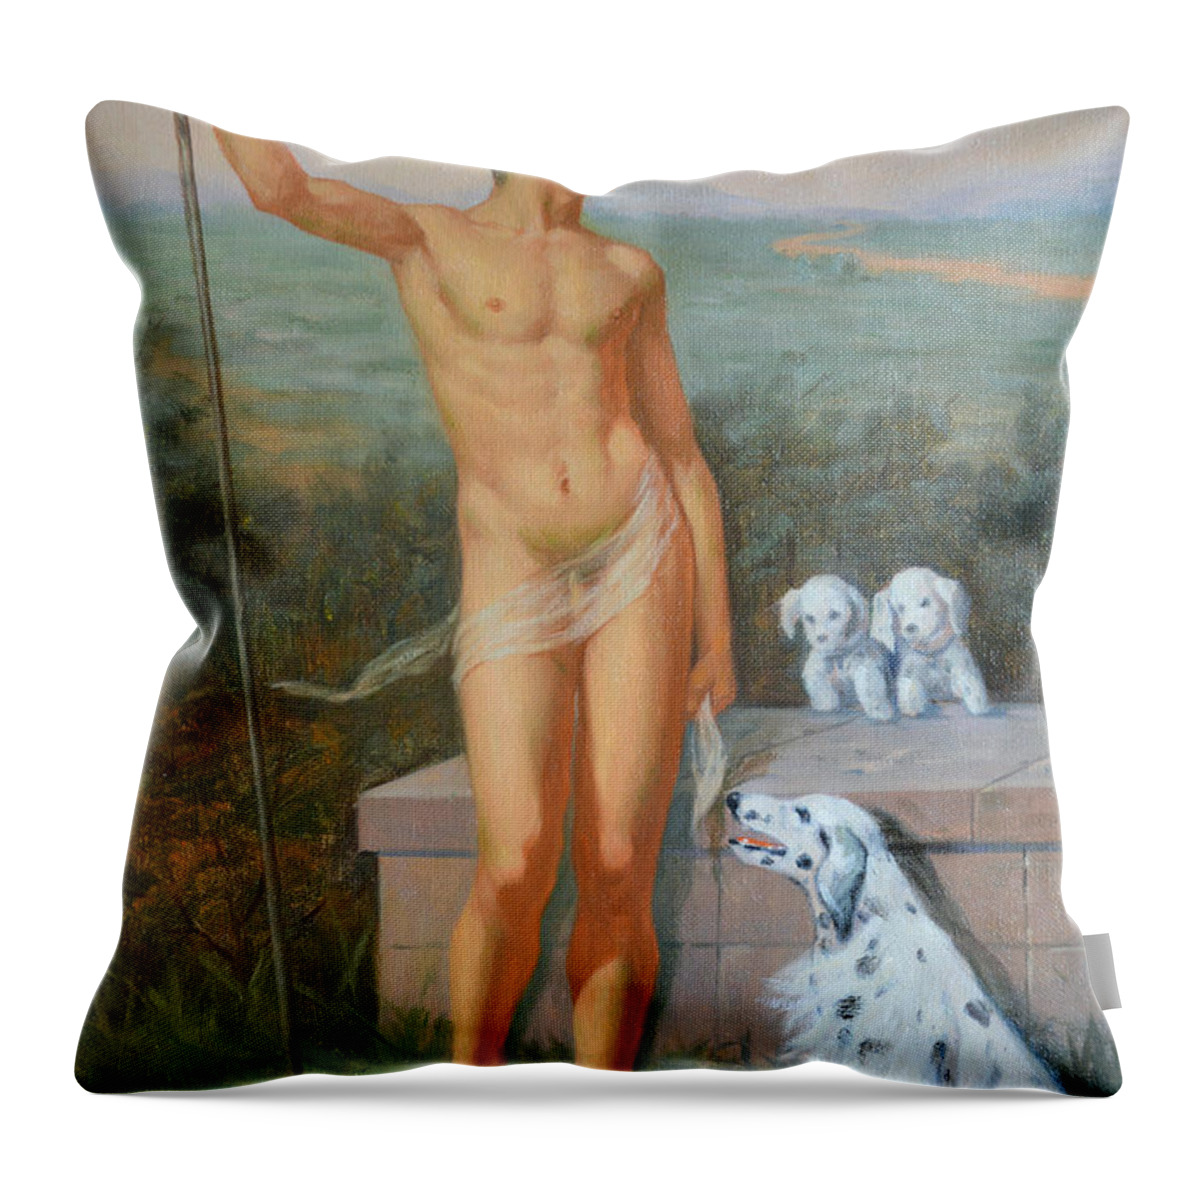 Original. Oil Painting Throw Pillow featuring the painting Original classic oil painting man body art-male nude and dogs #16-2-4-11 by Hongtao Huang